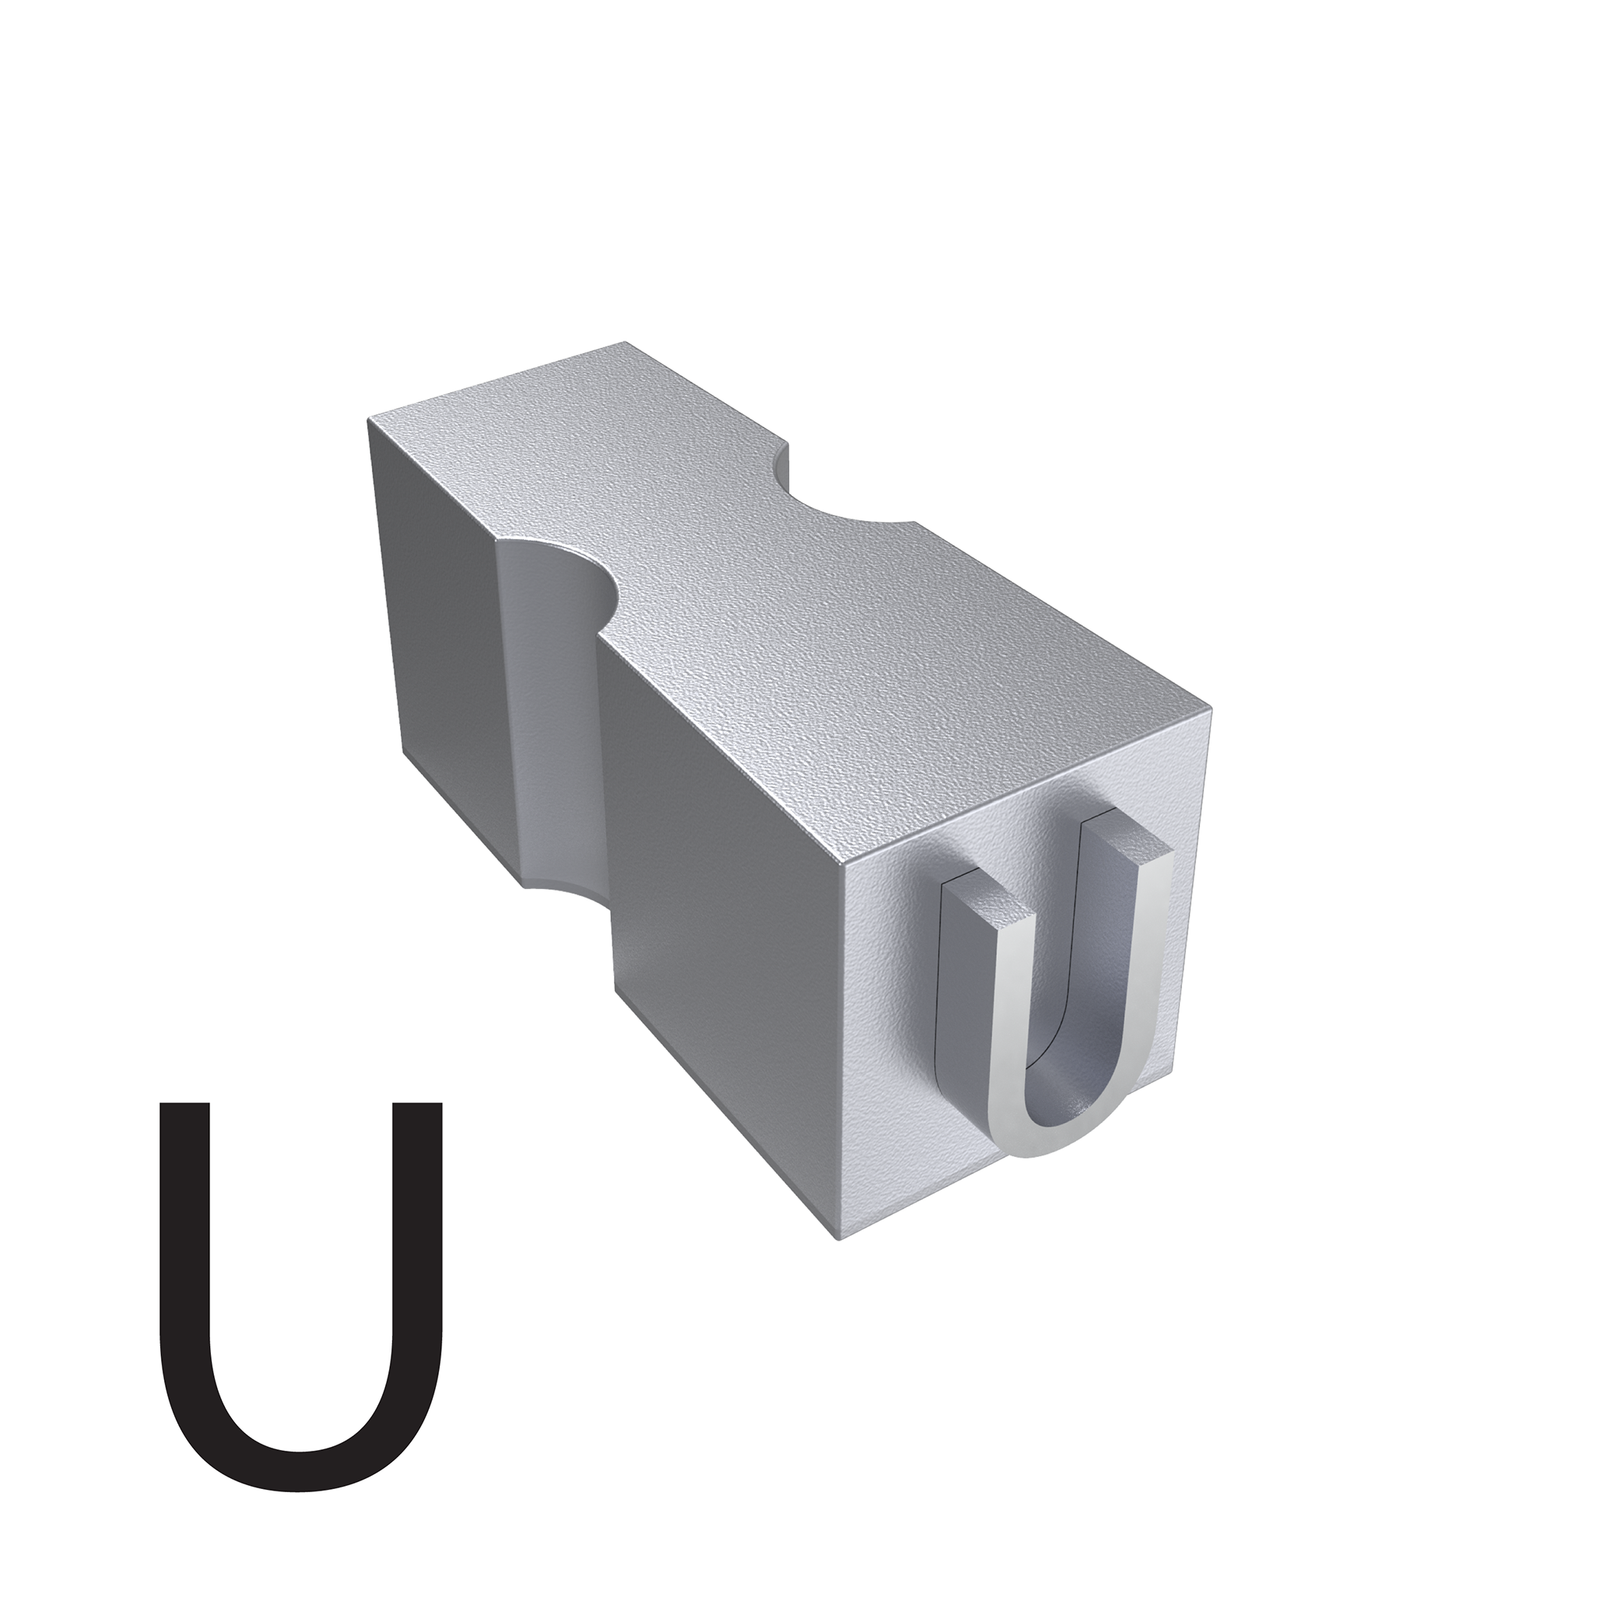 5.5mm letter U type used for printers